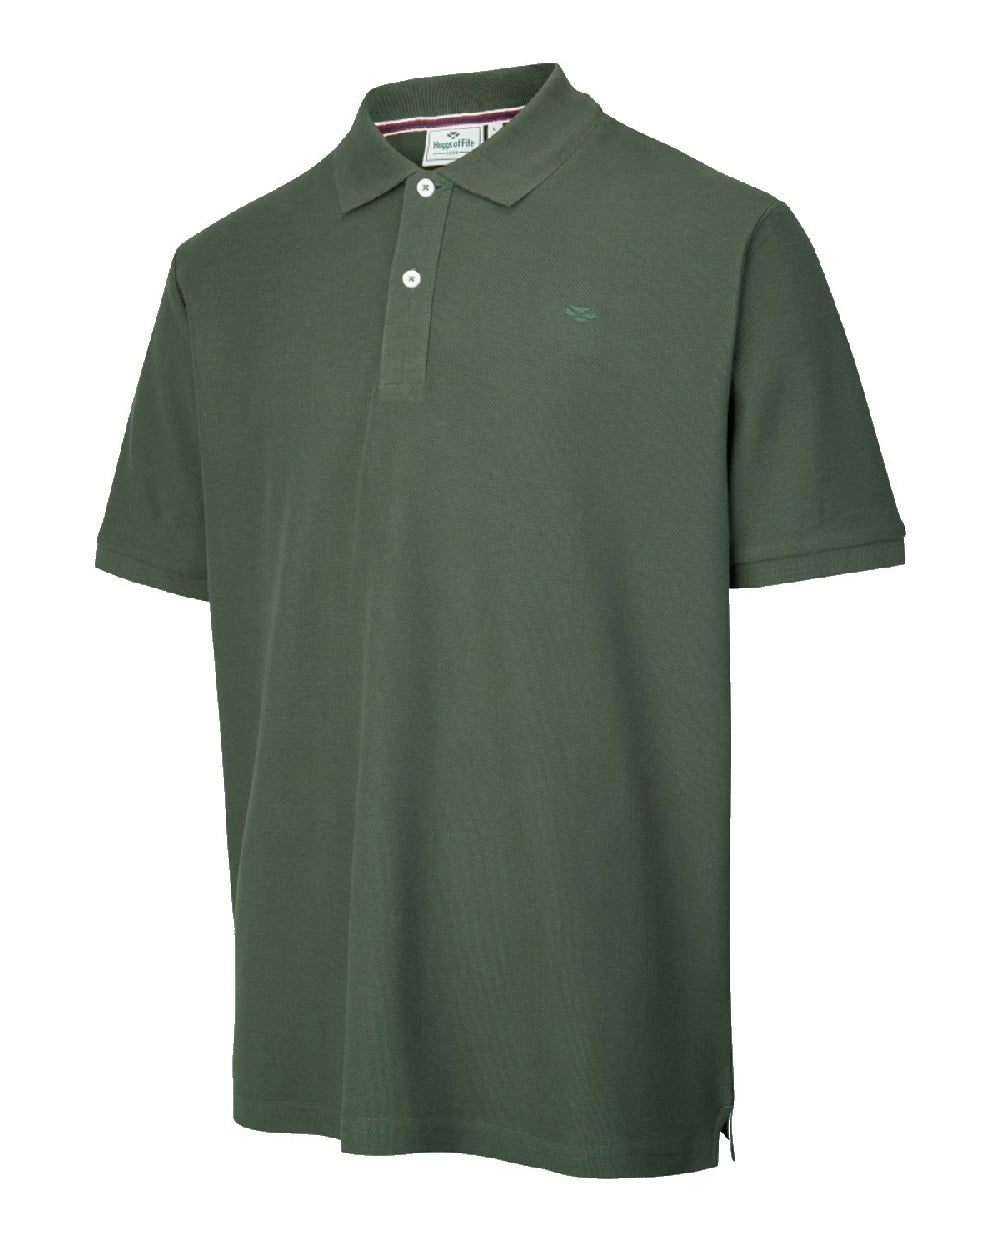 Bottle Green coloured Hoggs of Fife Largs Pique Polo Shirt on white background 